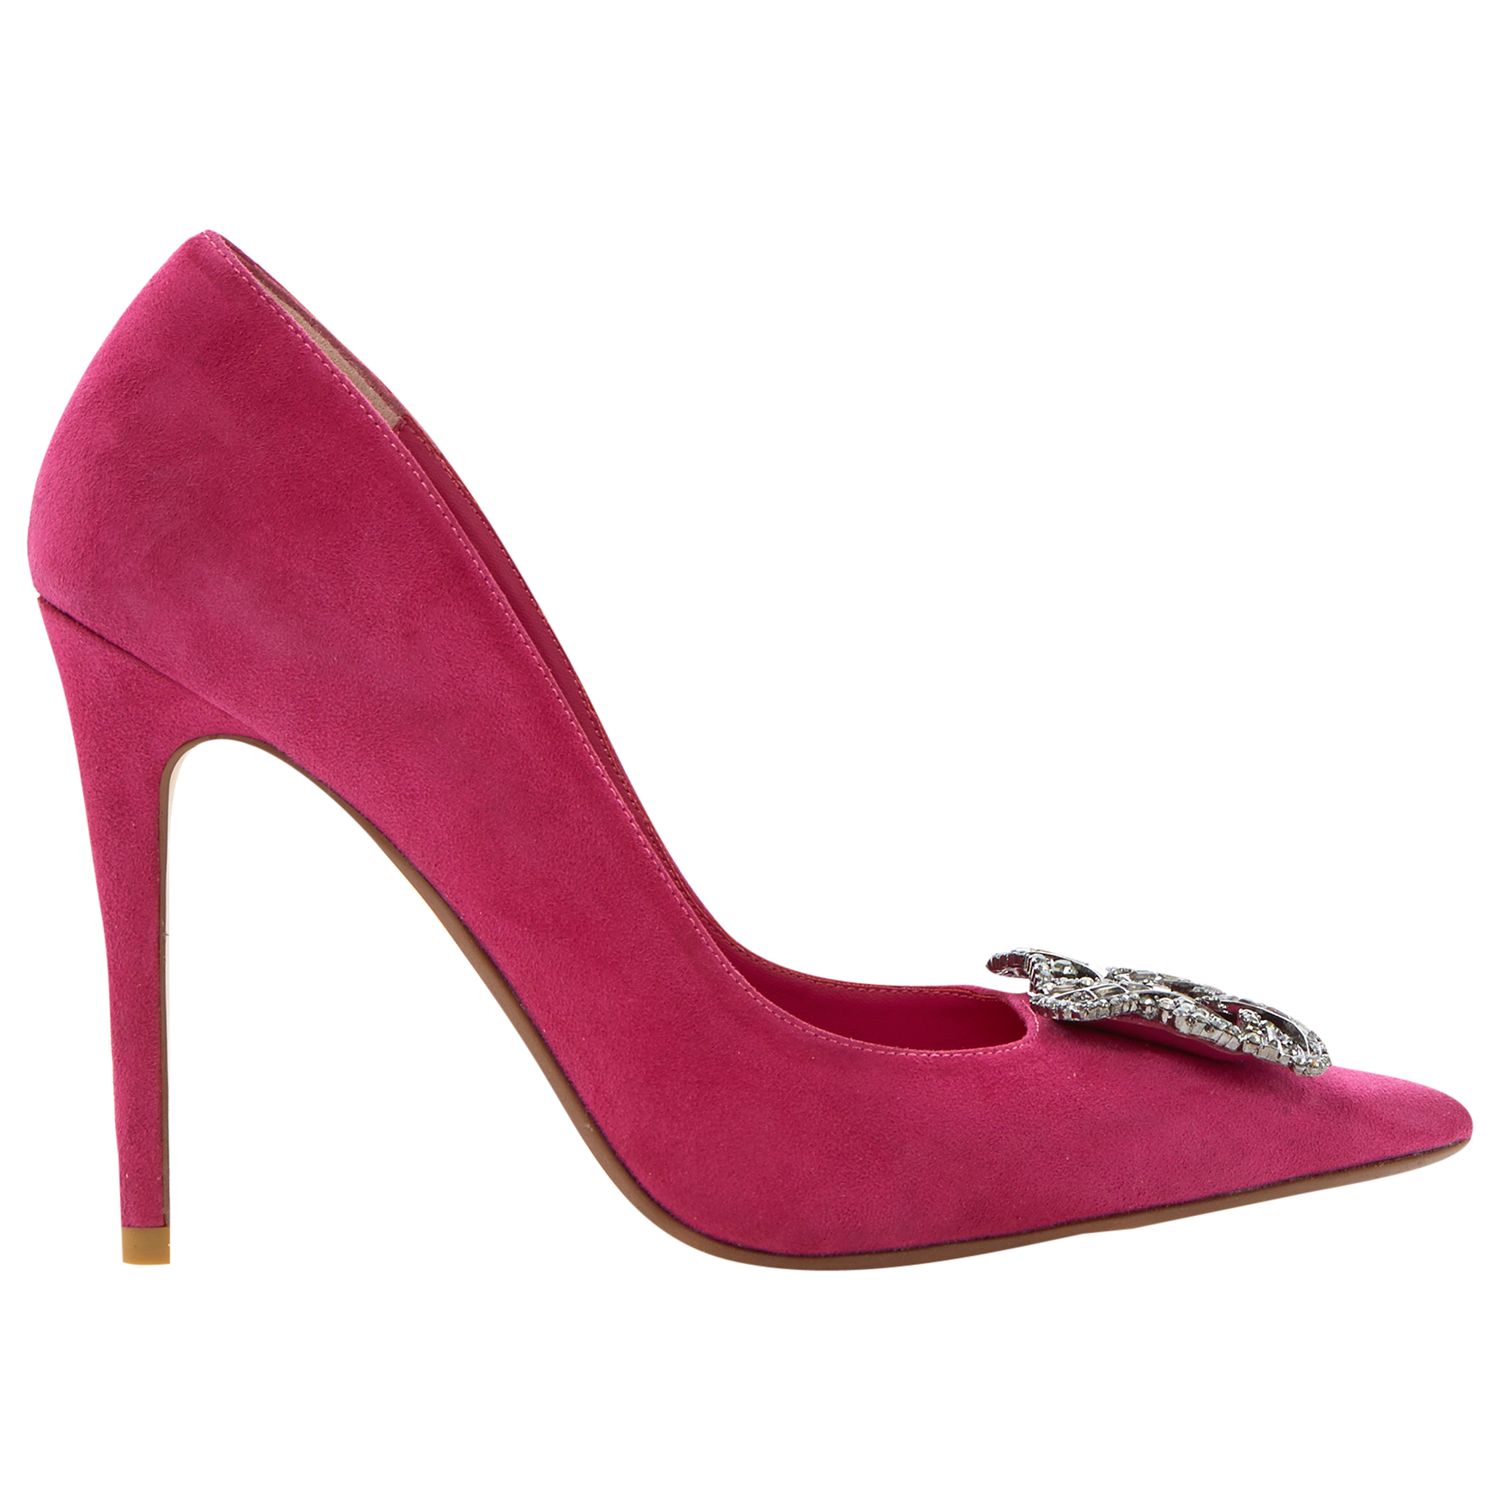 Dune Breanna Jewelled Brooch Court Shoes at John Lewis